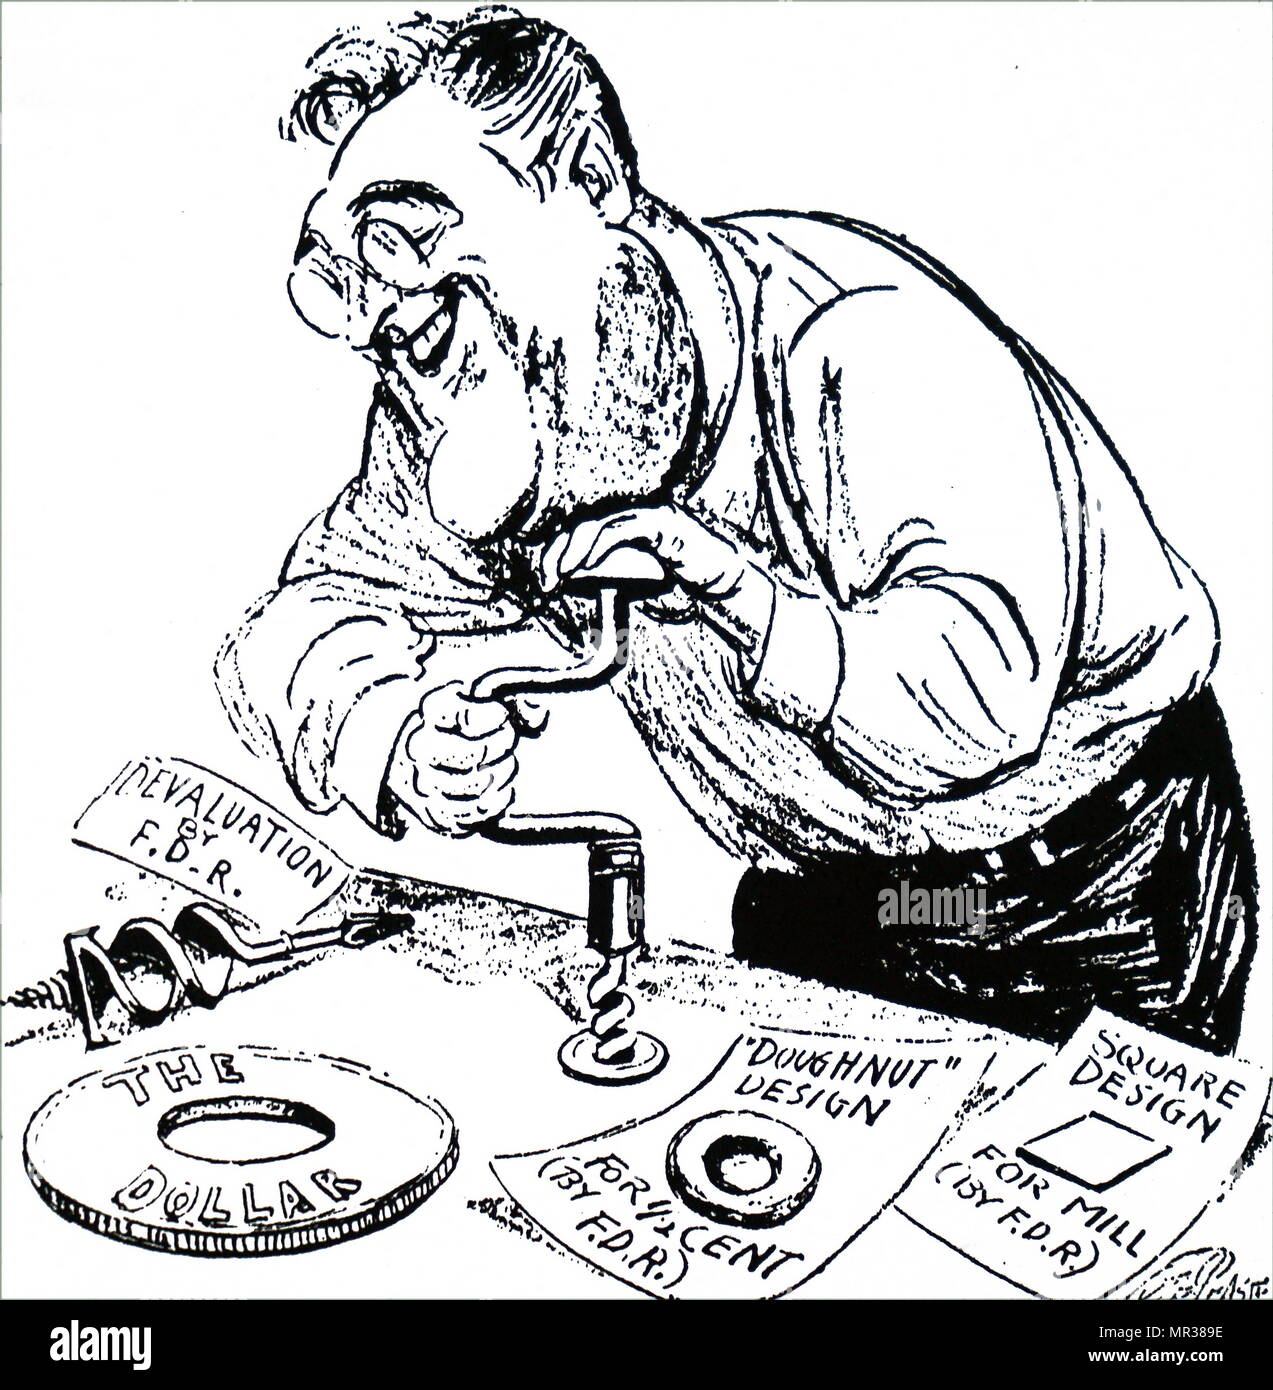 Cartoon depicting Roosevelt tinkering with the United States currency.  Franklin D. Roosevelt (1882-1945) an American statesman and political leader who served as the 32nd President of the United States. Dated 20th century Stock Photo